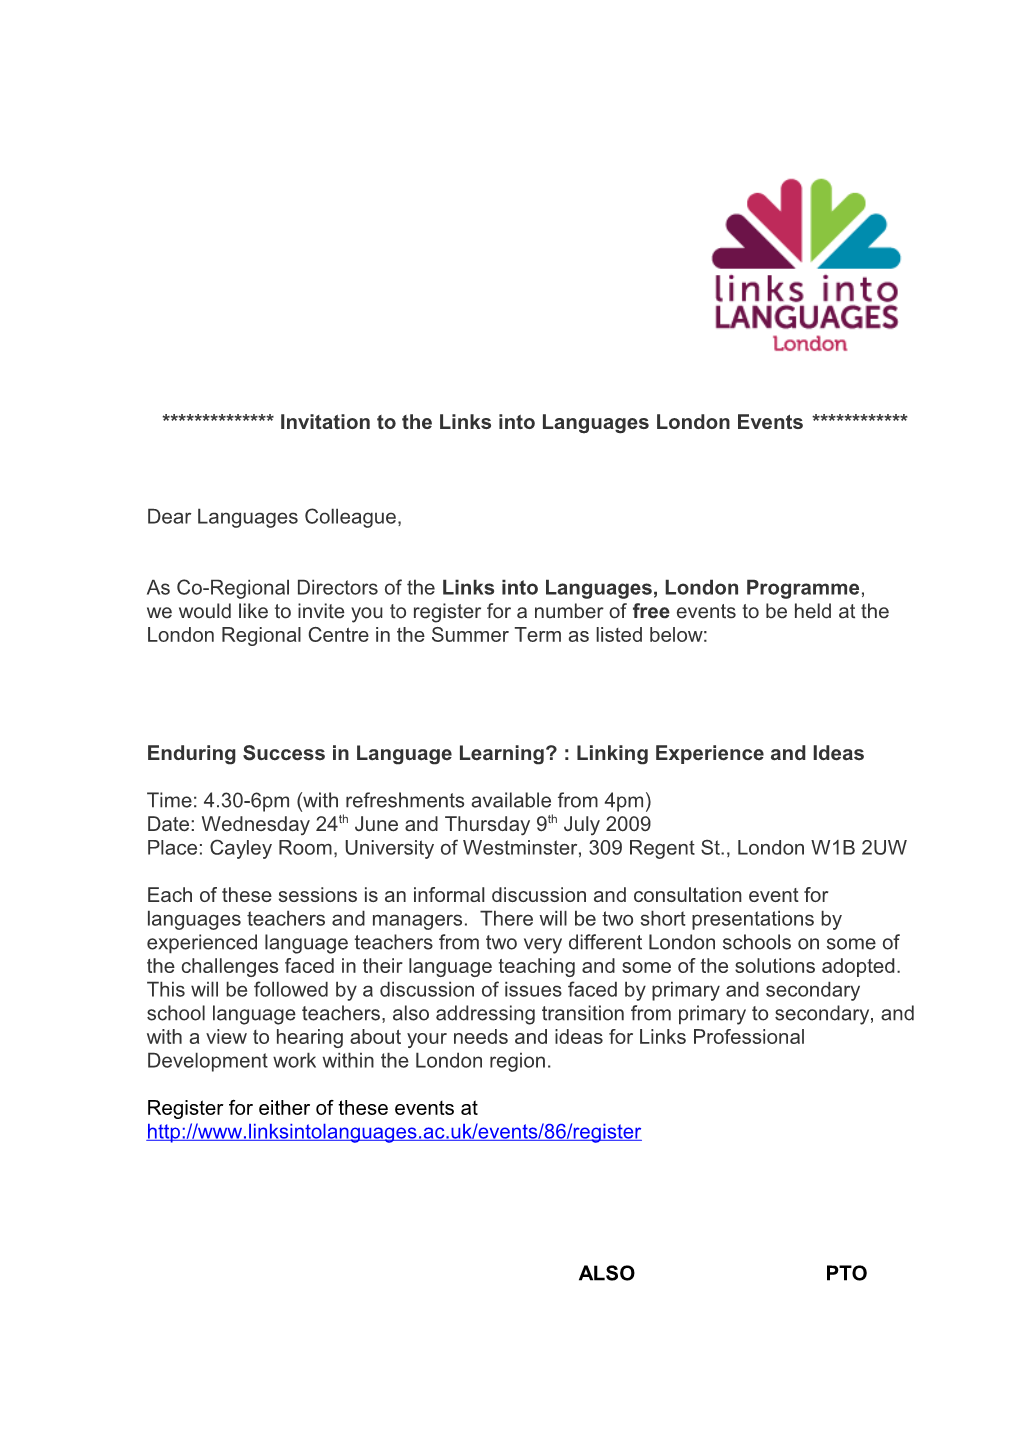 Invitation to the Launch of Links Into Language